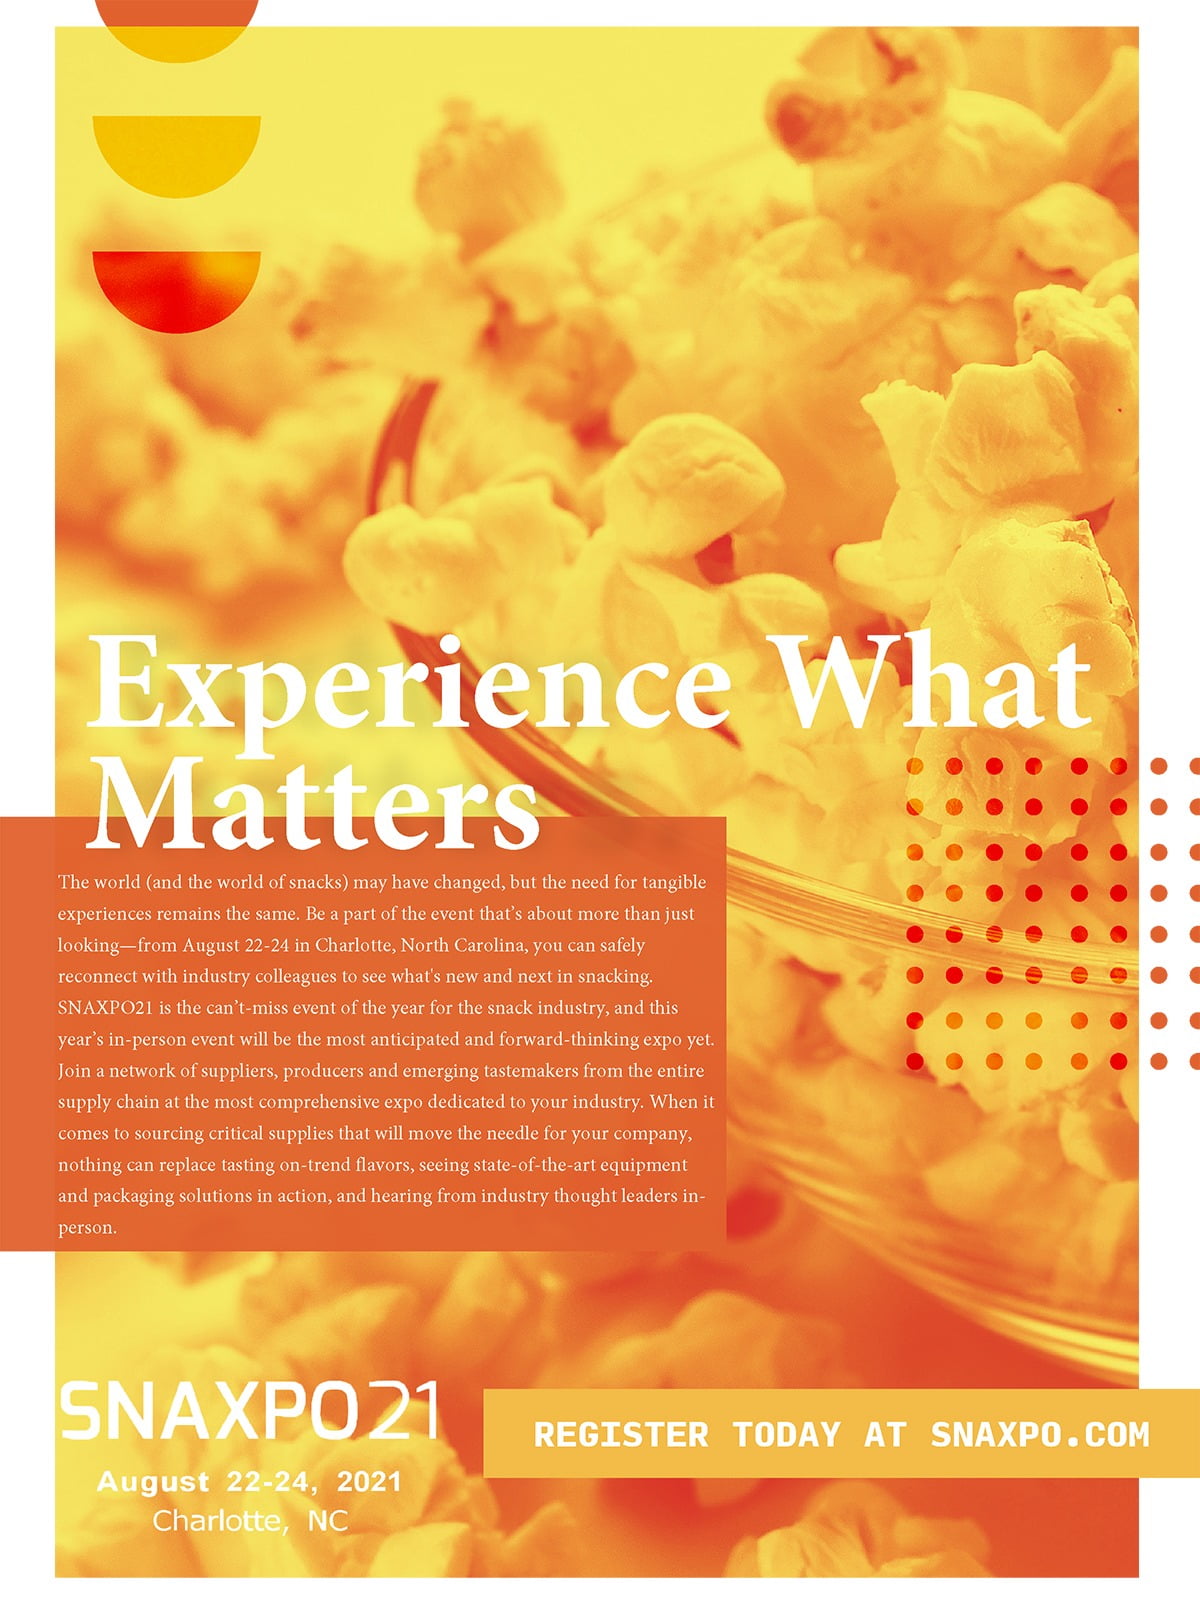 Full page ad, Orange, Shapes, Popcorn photo, 2021 event, Boxes